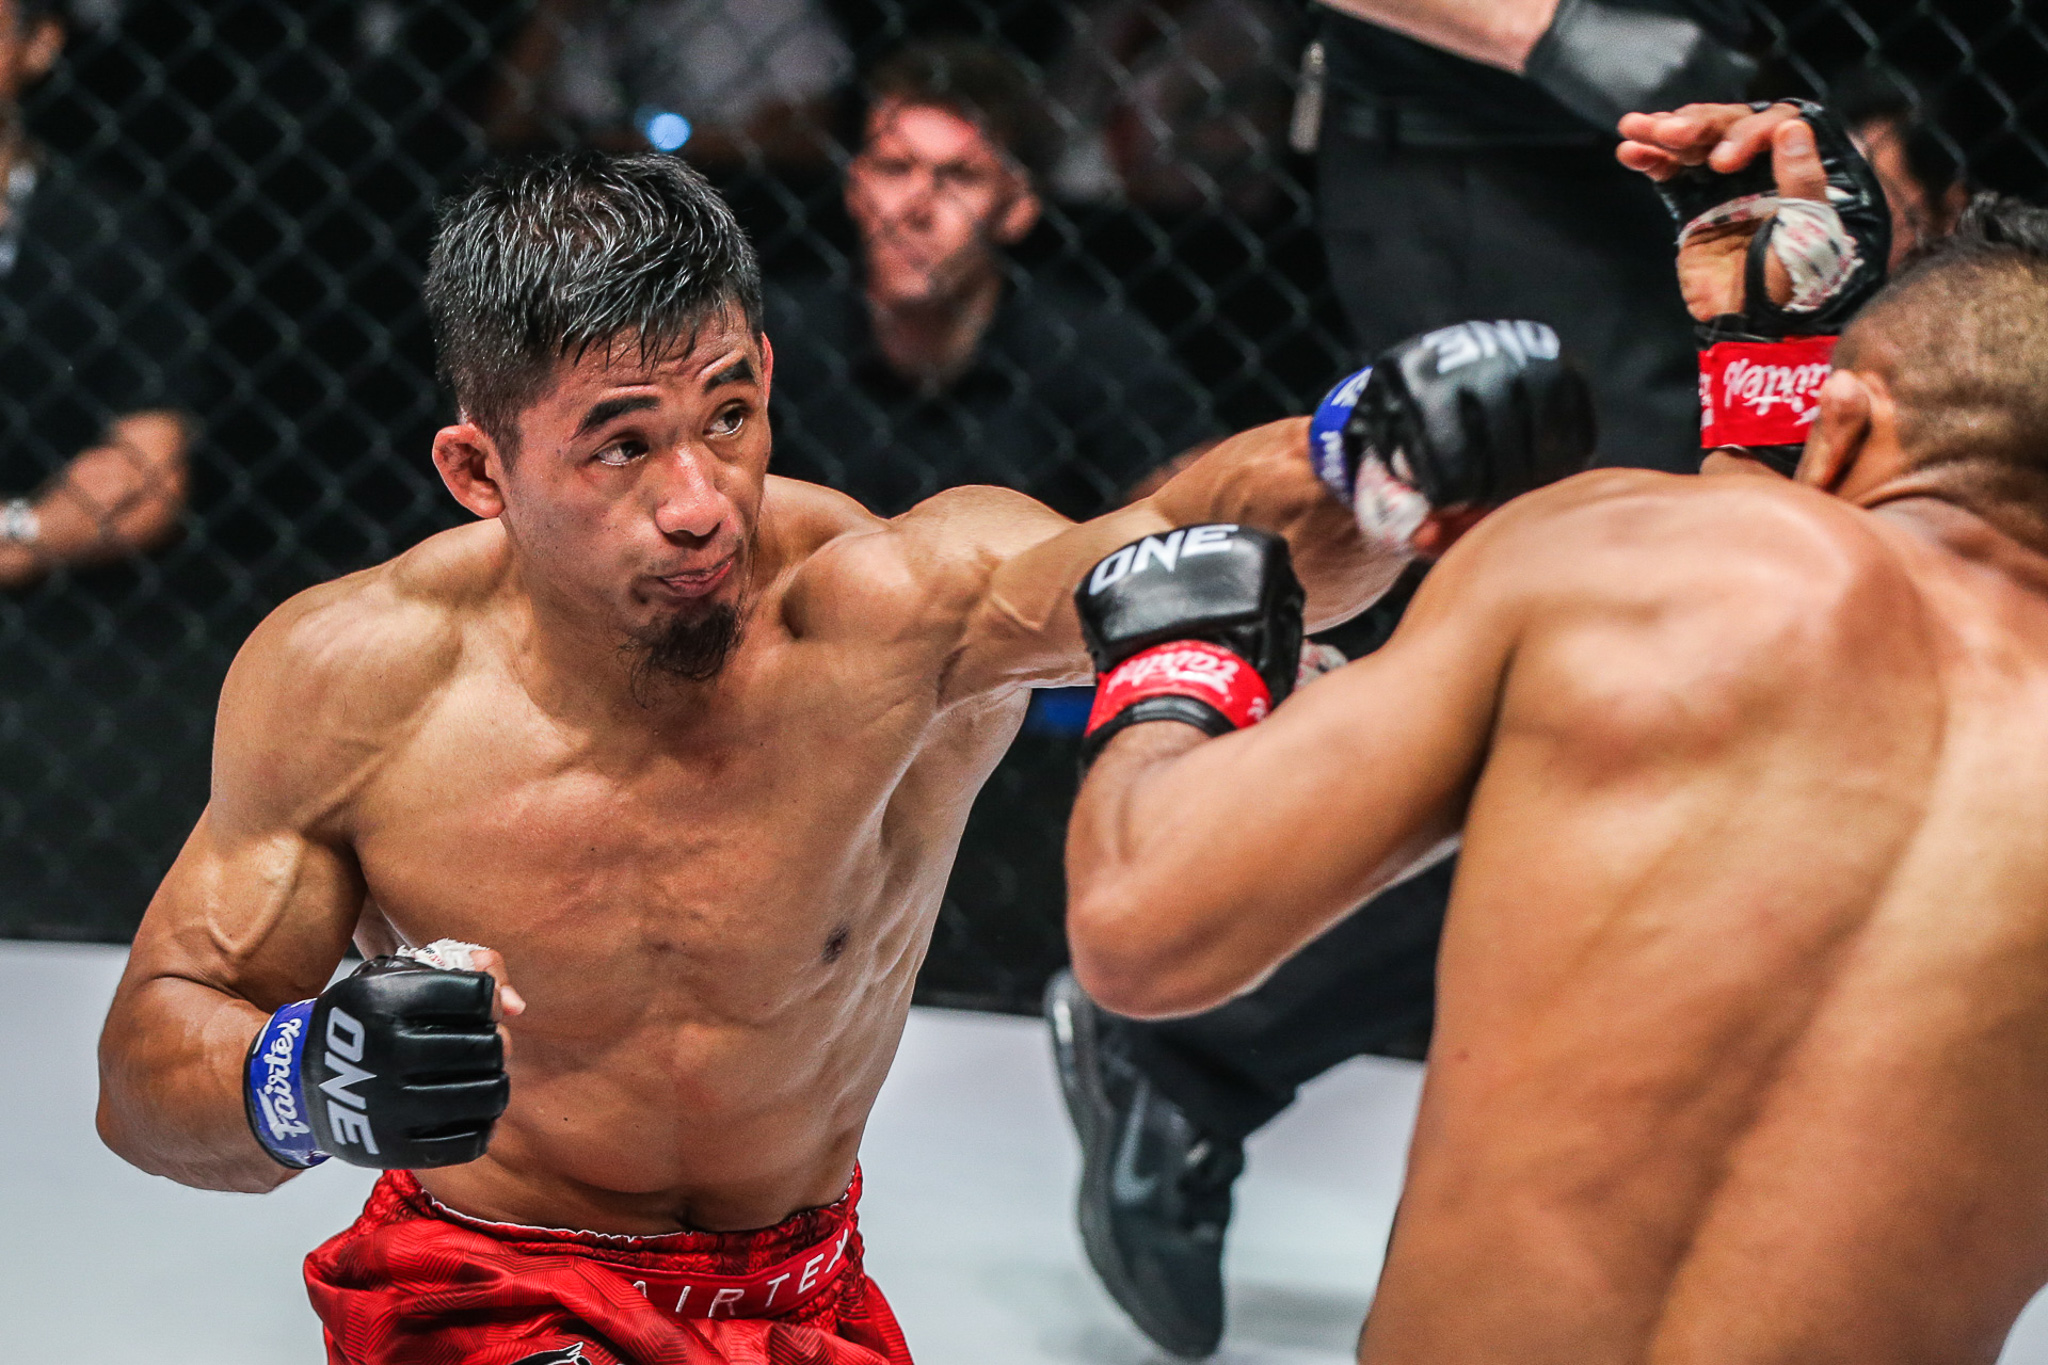 Sangiao says Stephen Loman is ready to challenge Andrade